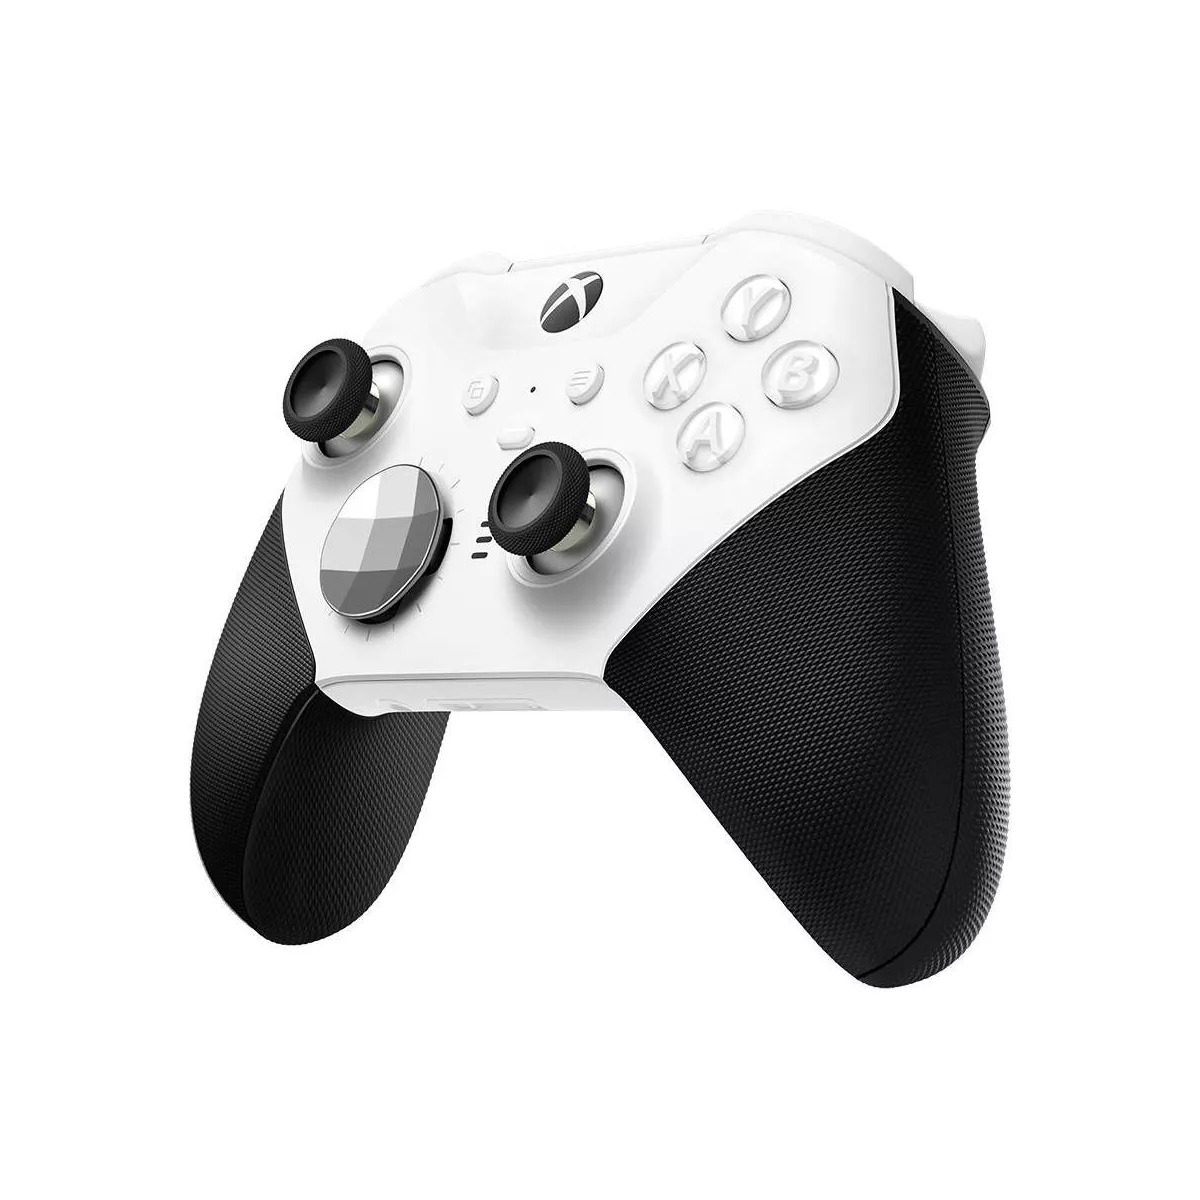 YMMV - Xbox Elite Series 2 Core Wireless Controller in-store at Target $64.99